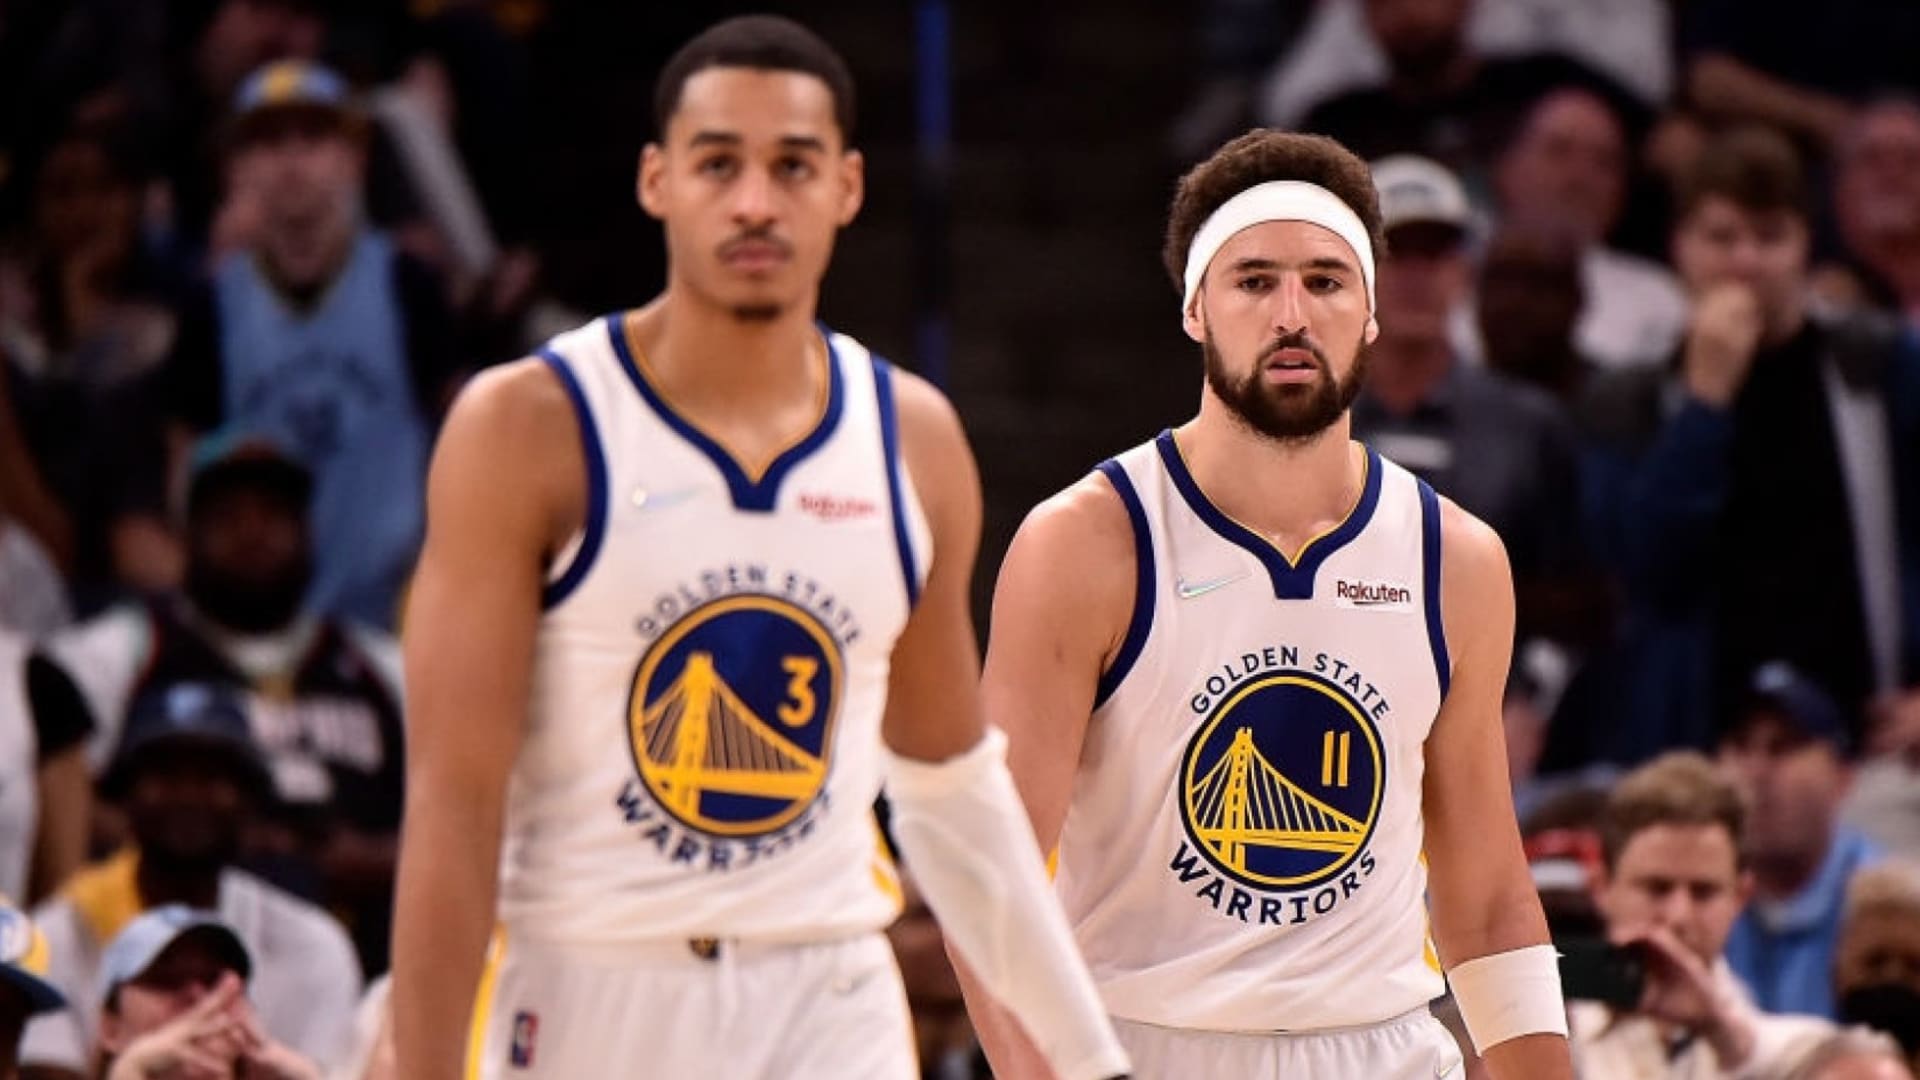 Jordan Poole and Klay Thompson of the Golden State Warriors.